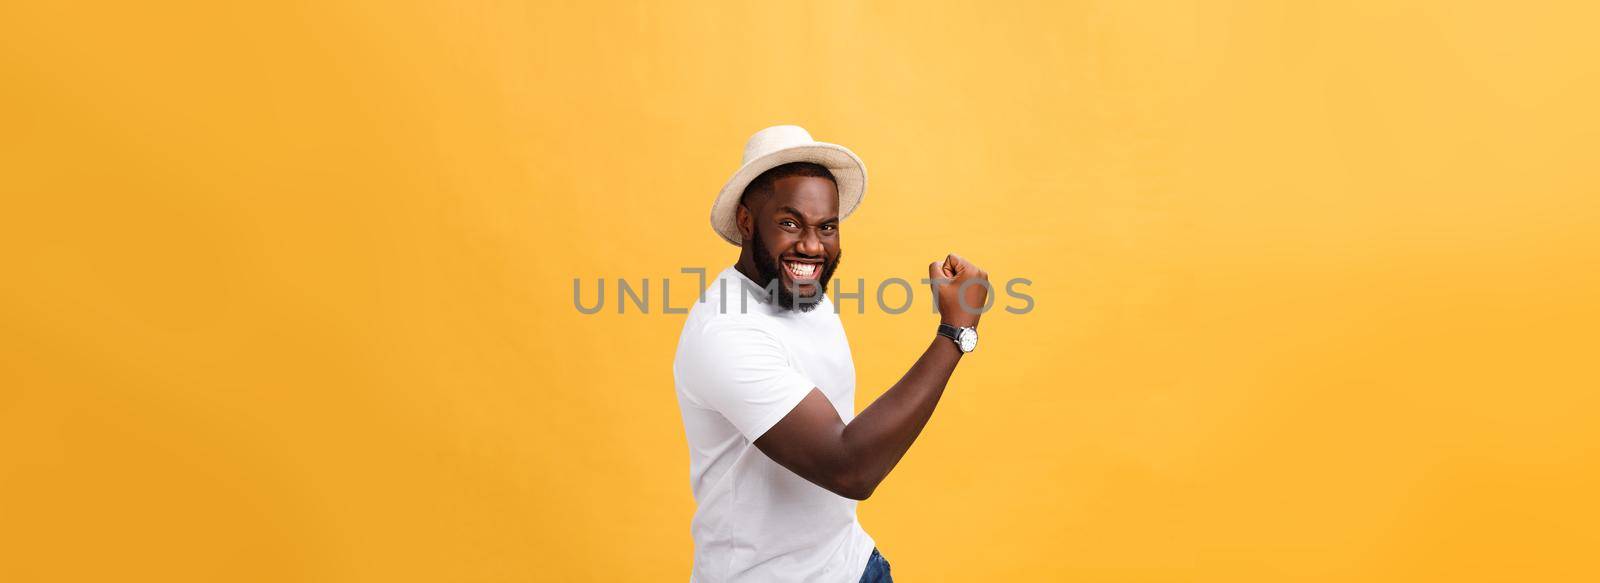 Handsome young Afro-American man employee feeling excited, gesturing actively, keeping fists clenched, exclaiming joyfully with mouth wide opened, happy with good luck or promotion at work.